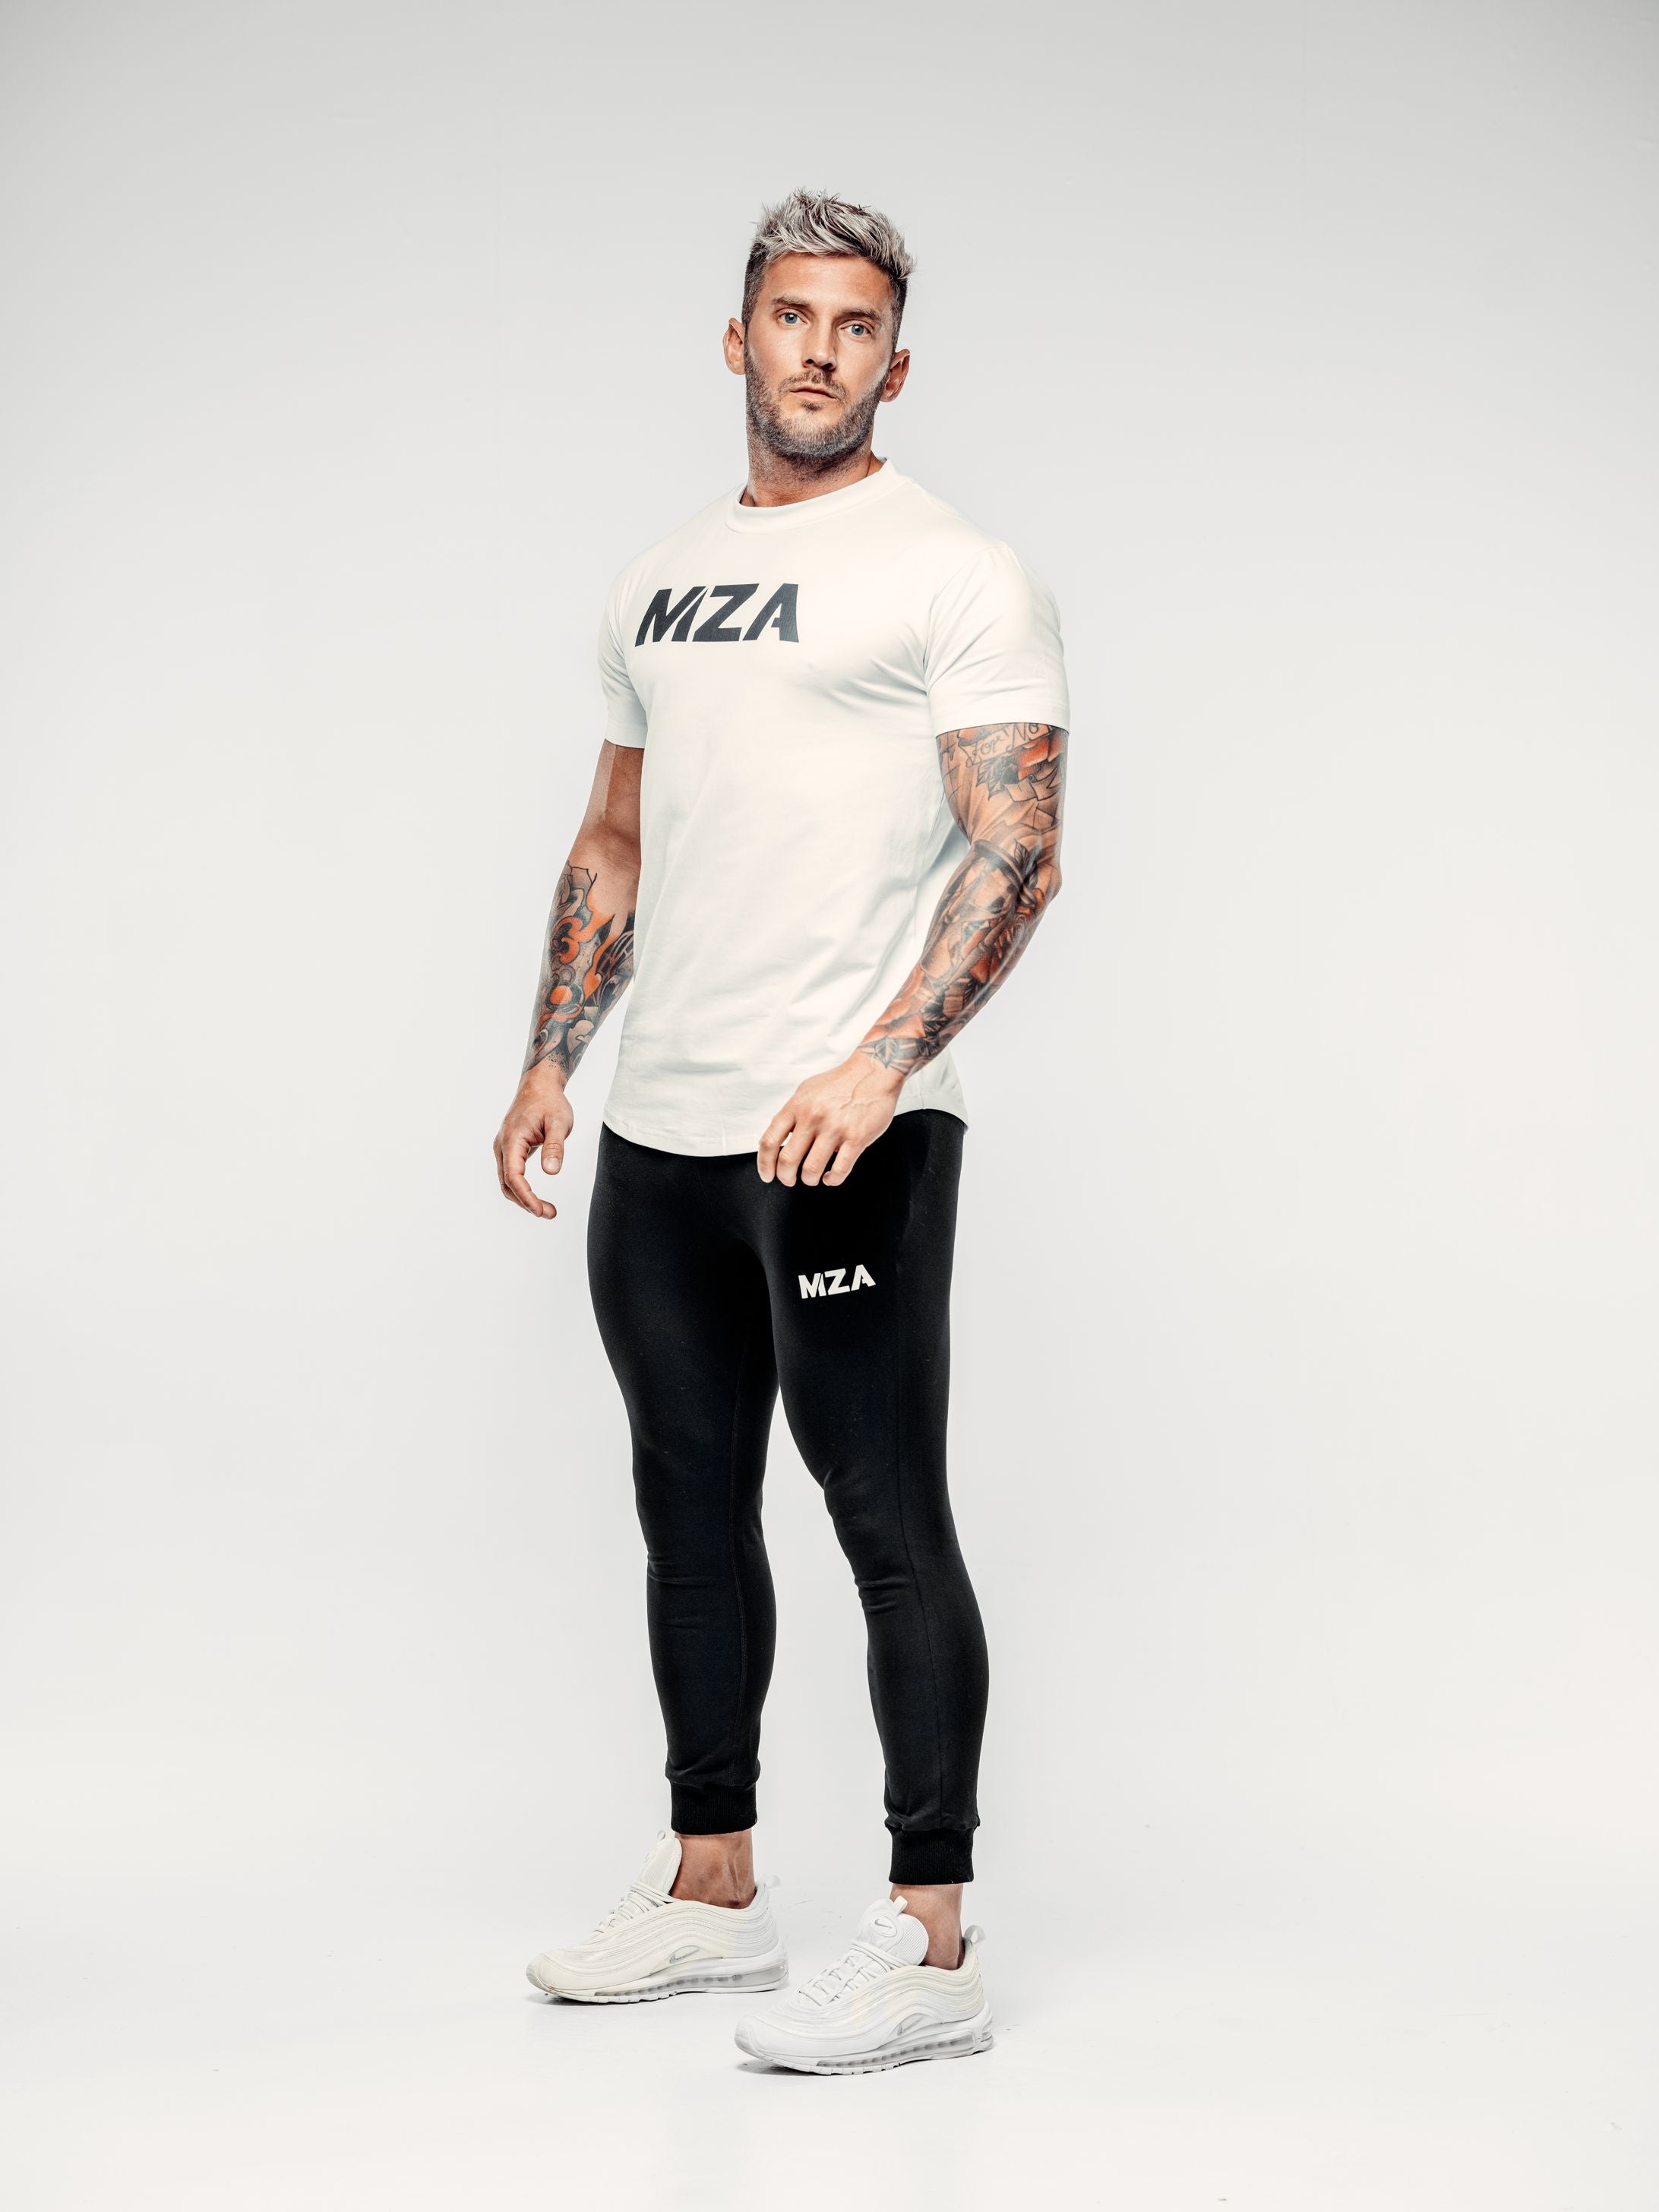 Shane is stood at a 45 degree angle wearing the new standard long line t-shirt in white with the new standard joggers in black